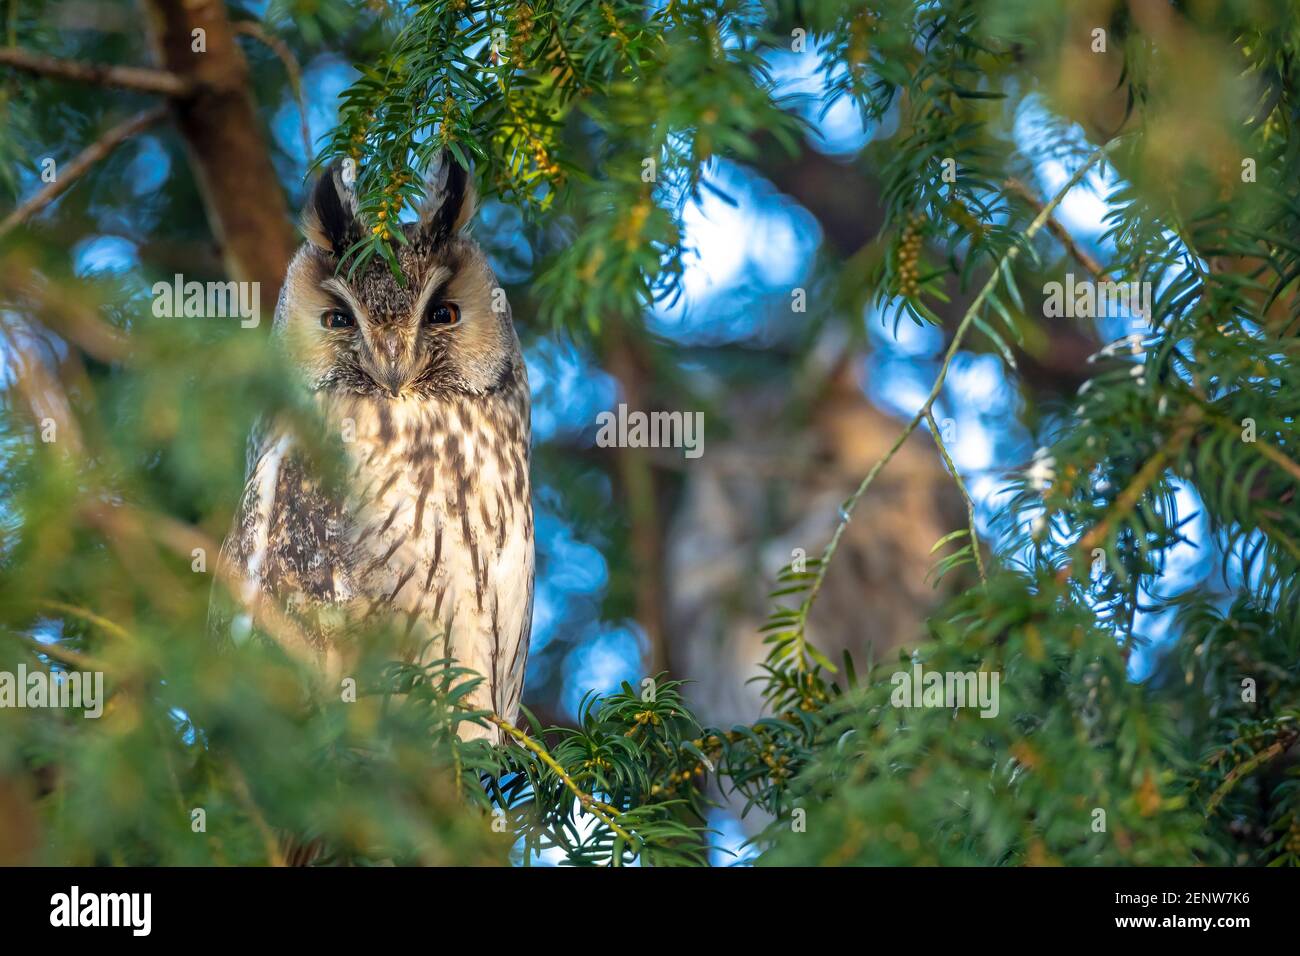 Long eared owl, Asio otus, bird of prey perched and resting in a tree wih snow in winter daytime colors facing camera. Stock Photo